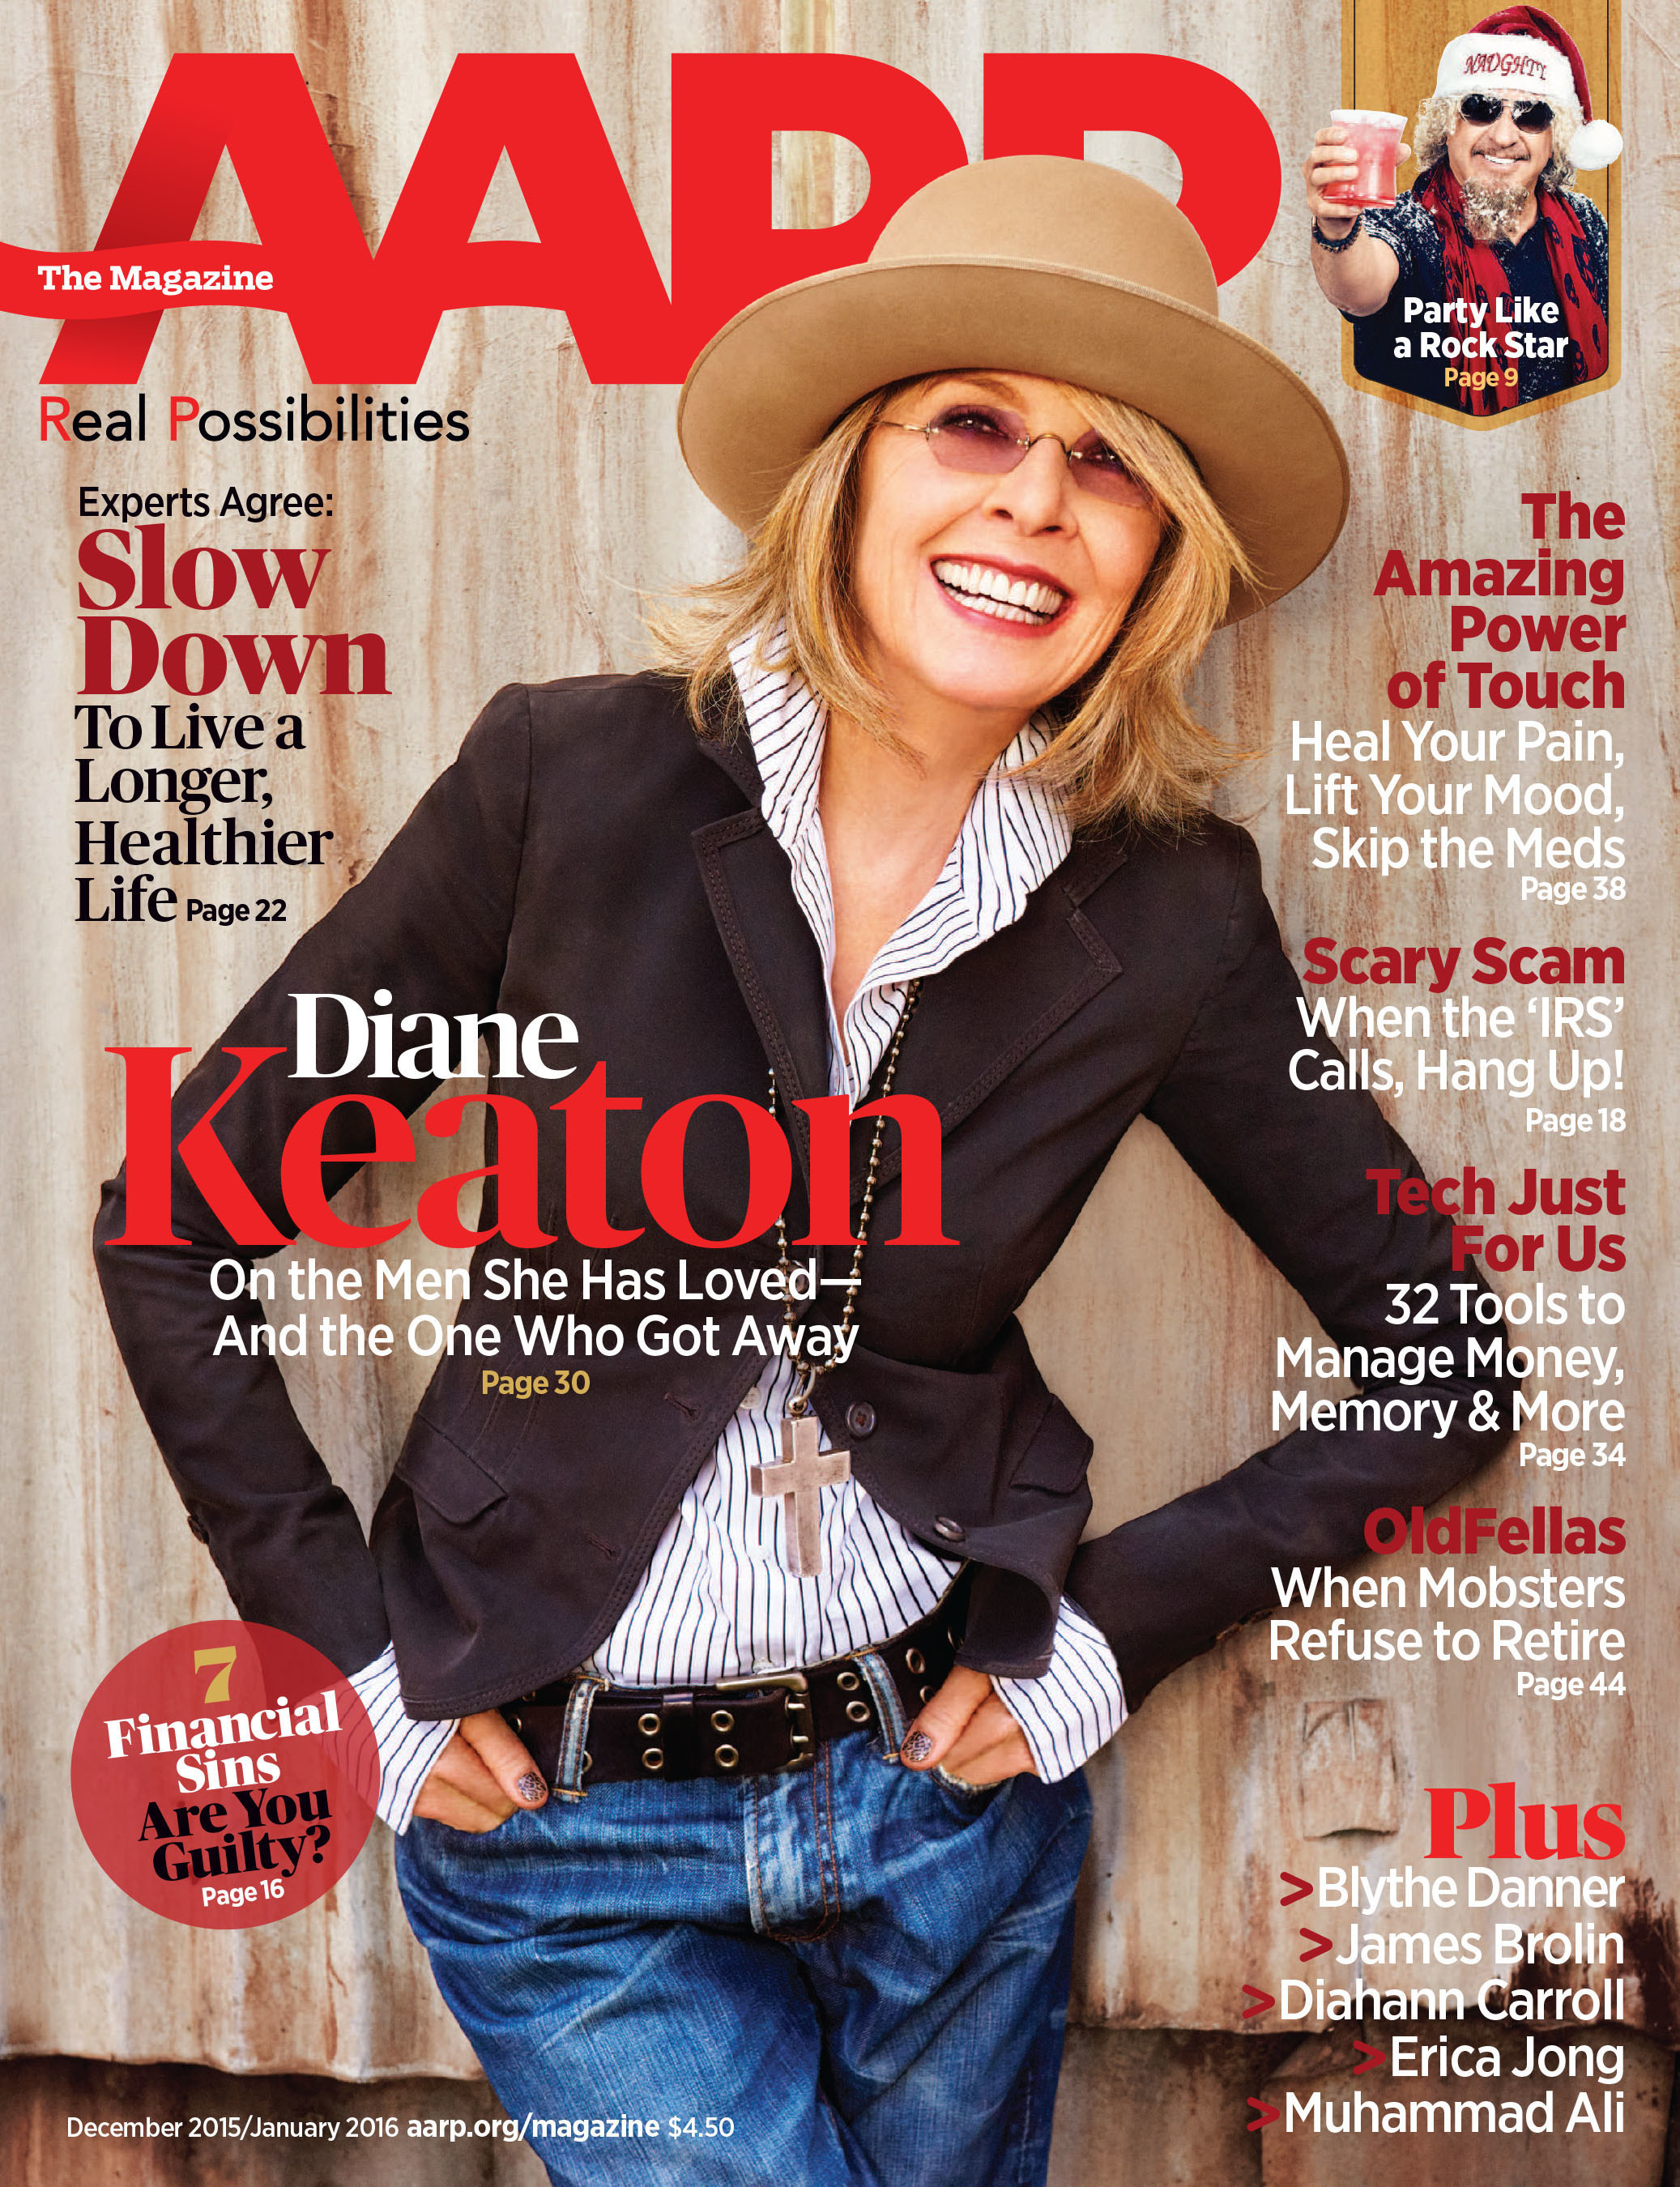 Actress Diane Keaton Talks Raising Kids At 69 And The Movie Stars She's Loved In The Latest Issue Of AARP - Lioness Magazin